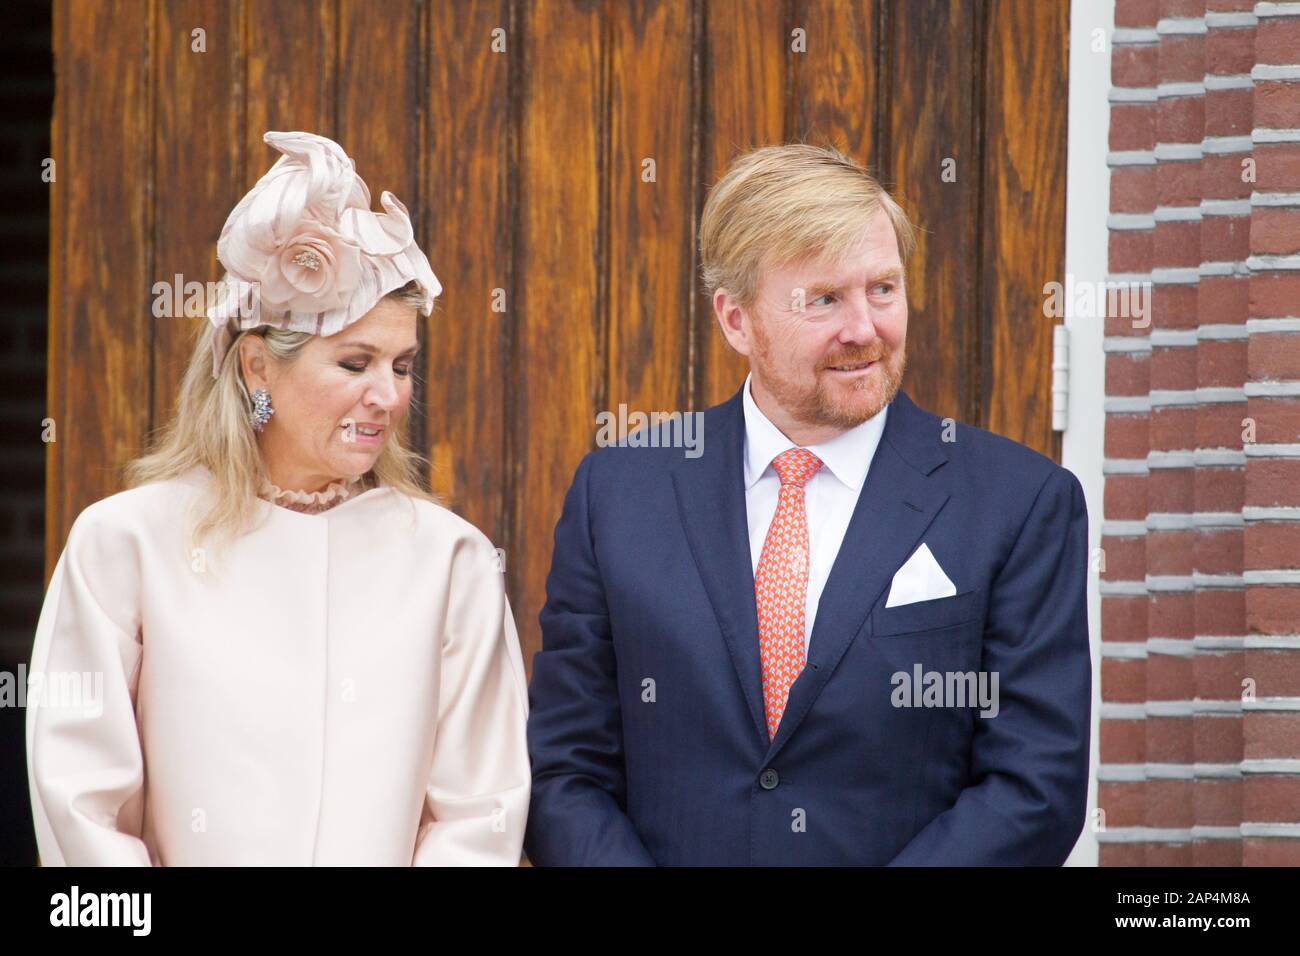 Hoogeveen, the Netherlands - September 18, 2019: royal couple Maxima and Willem-Alexander with hands folded standing in front of the Hoofdstraat churc Stock Photo